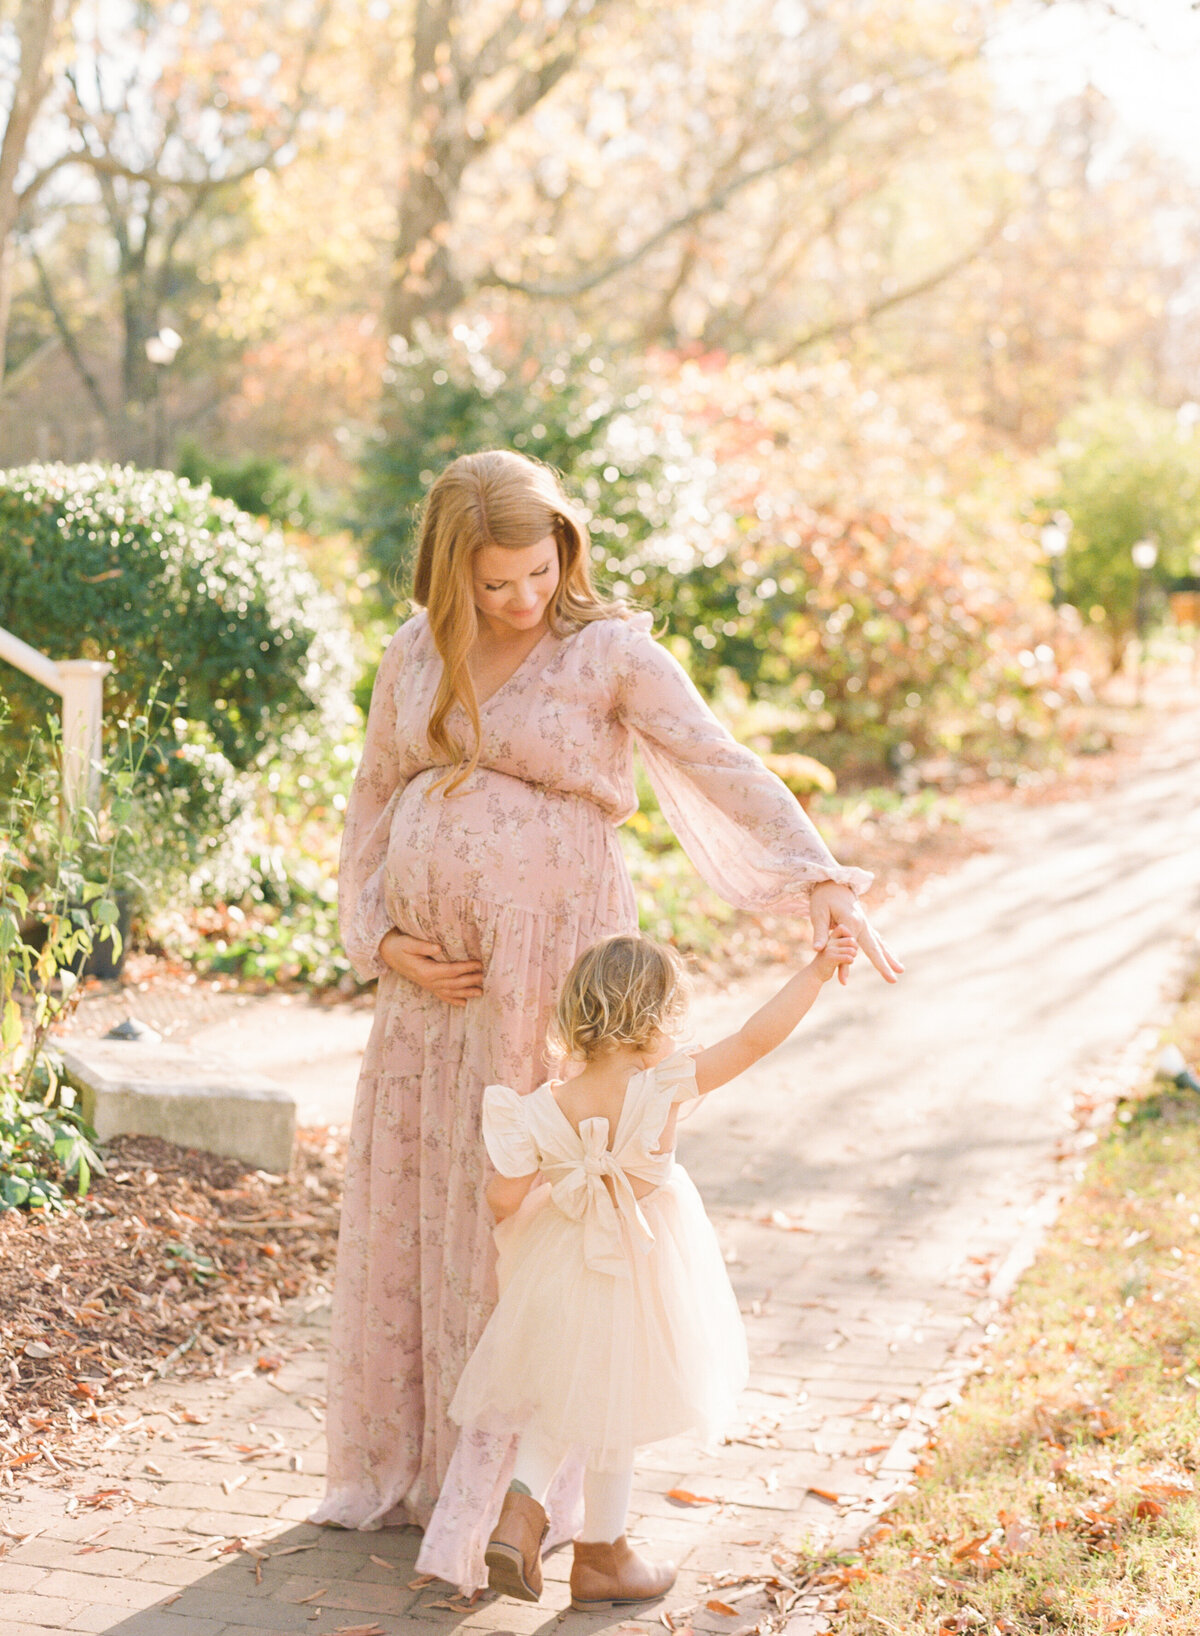 mom twirling daughter during her raleigh maternity session. Photographed by Raleigh maternity photograph A.J. Dunlap Photography.